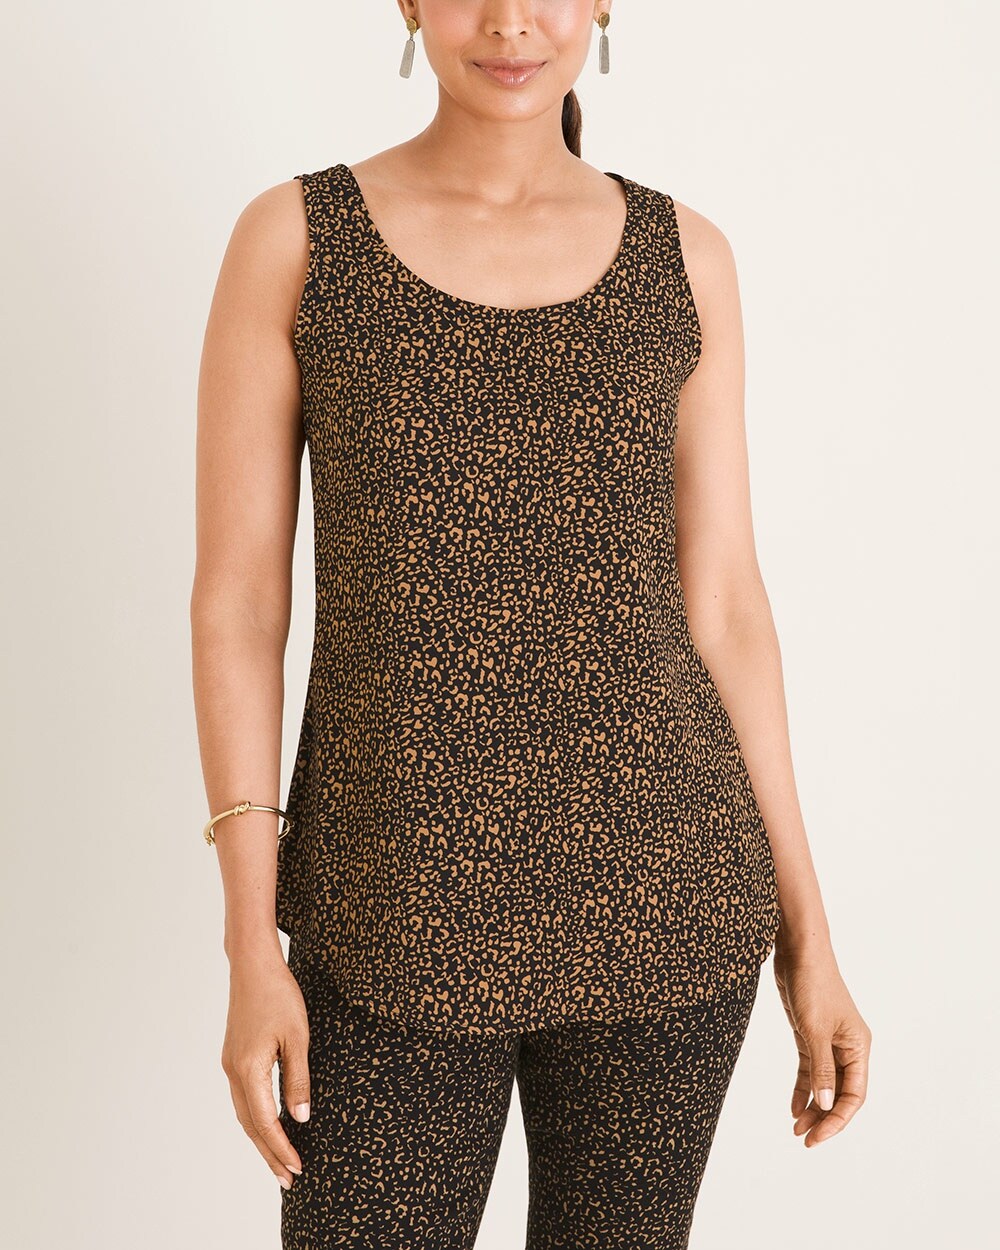 Etched-Texture Animal-Print Tank